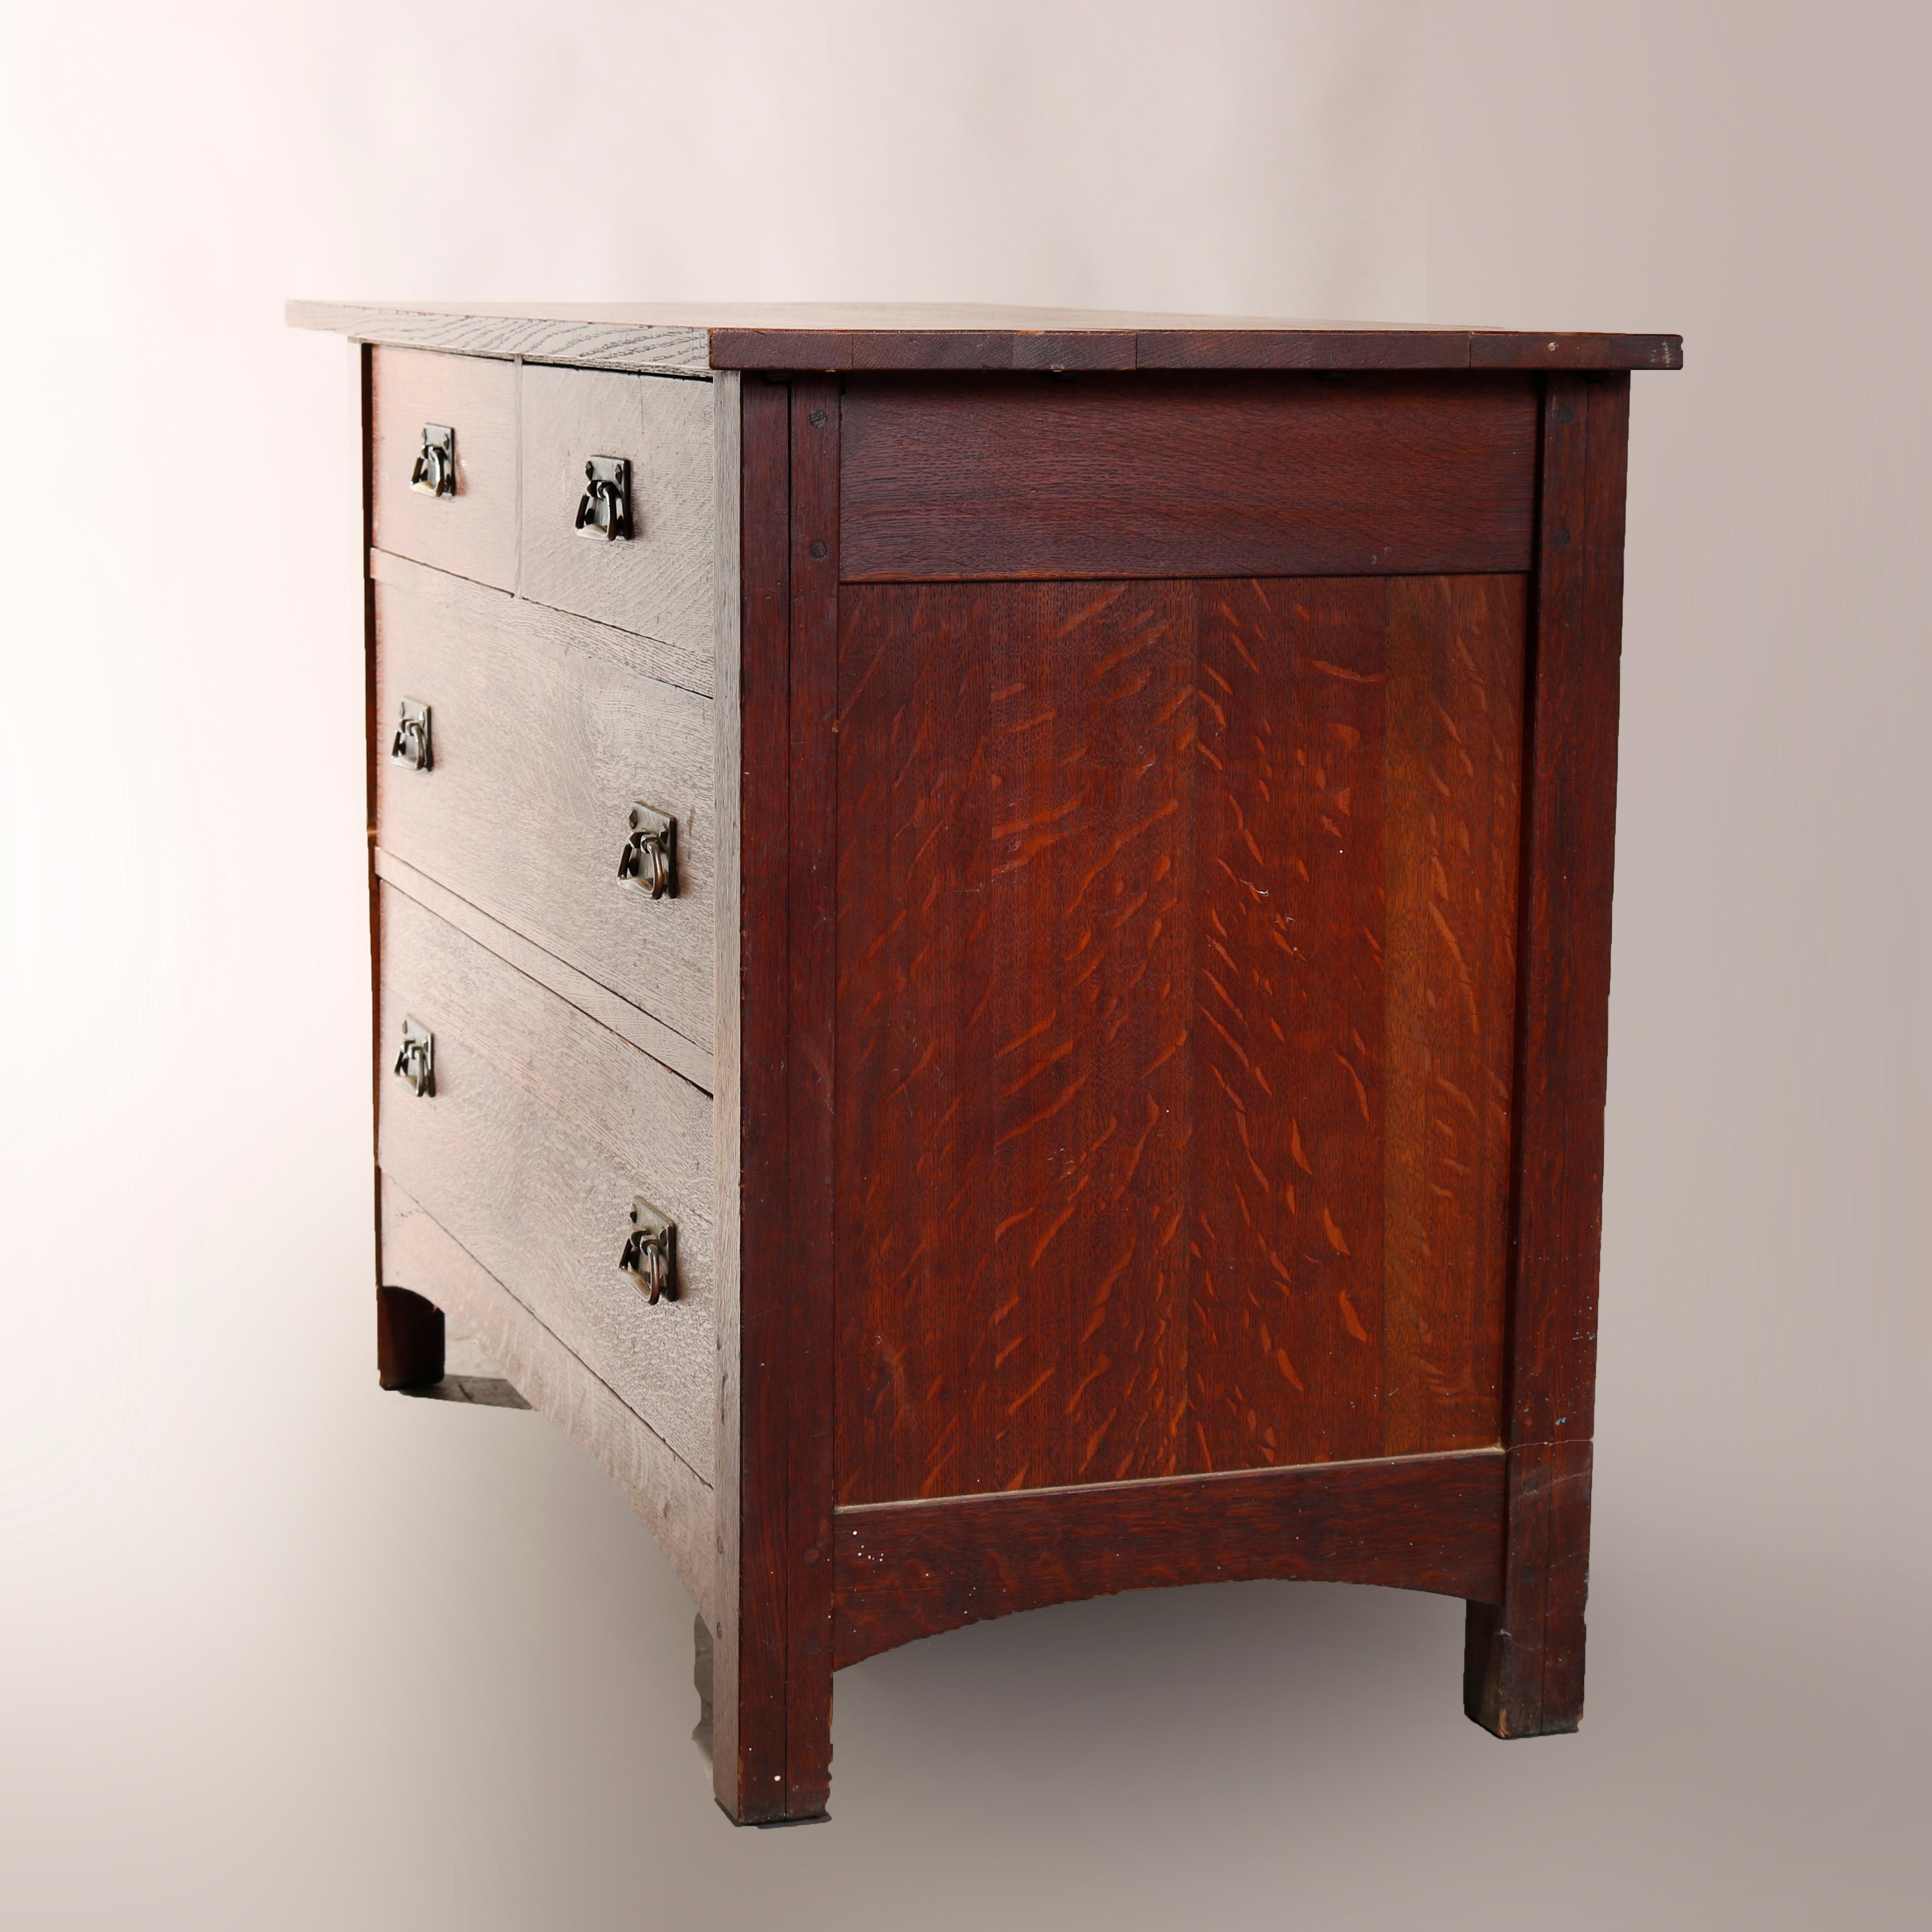 An antique Arts & Crafts mission chest of drawers attributed to Stickley offers oak construction with two small drawers over two long drawers, raised on straight and square legs having arched apron, circa 1910.

Measures: 33